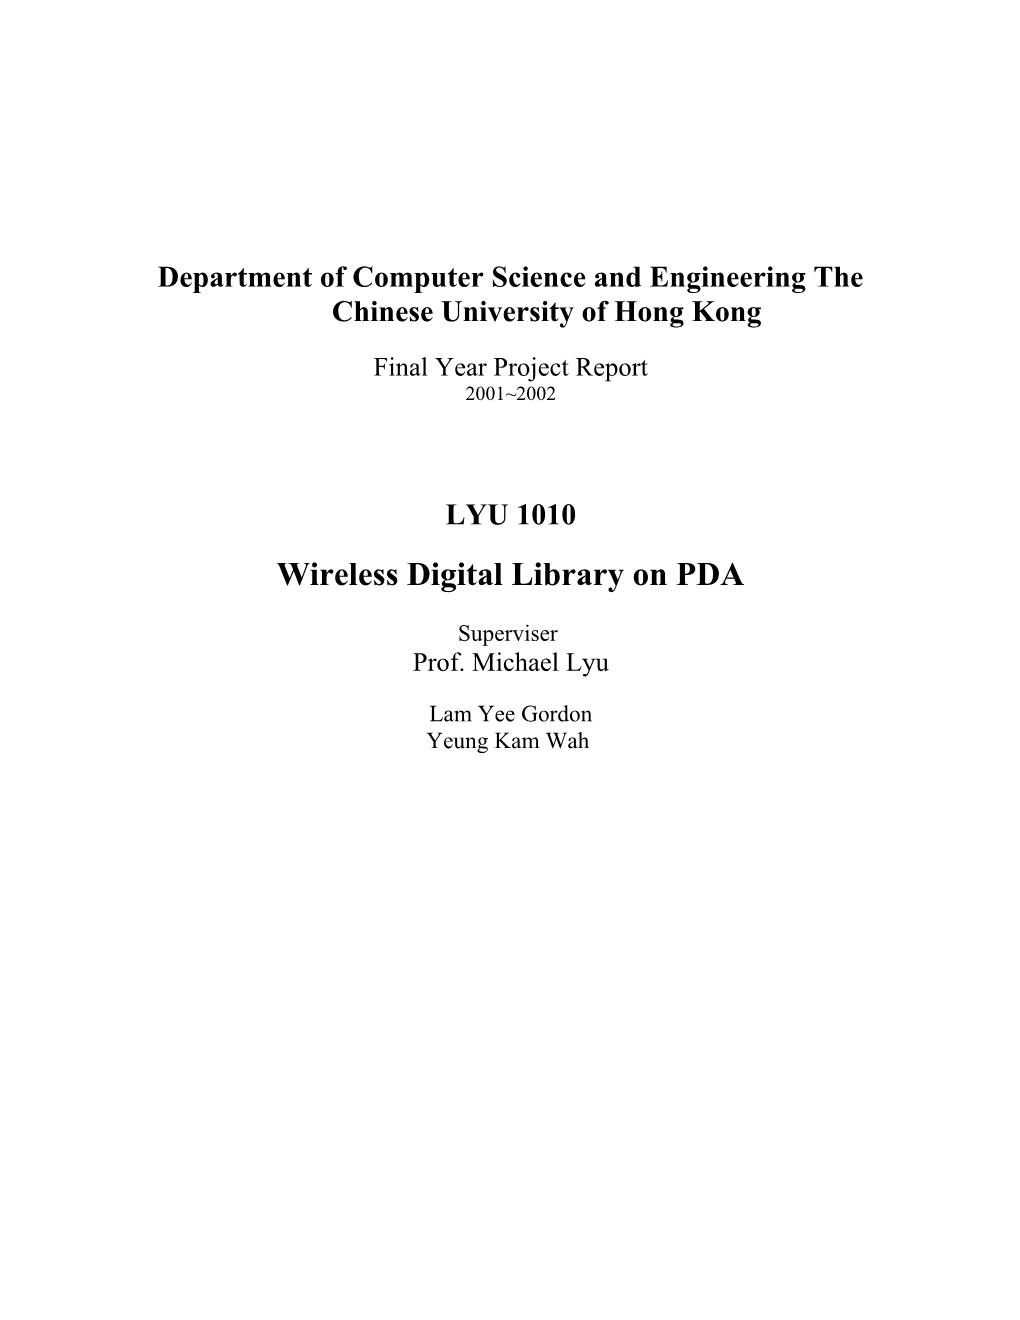 Department of Computer Science and Engineering the Chinese University of Hong Kong